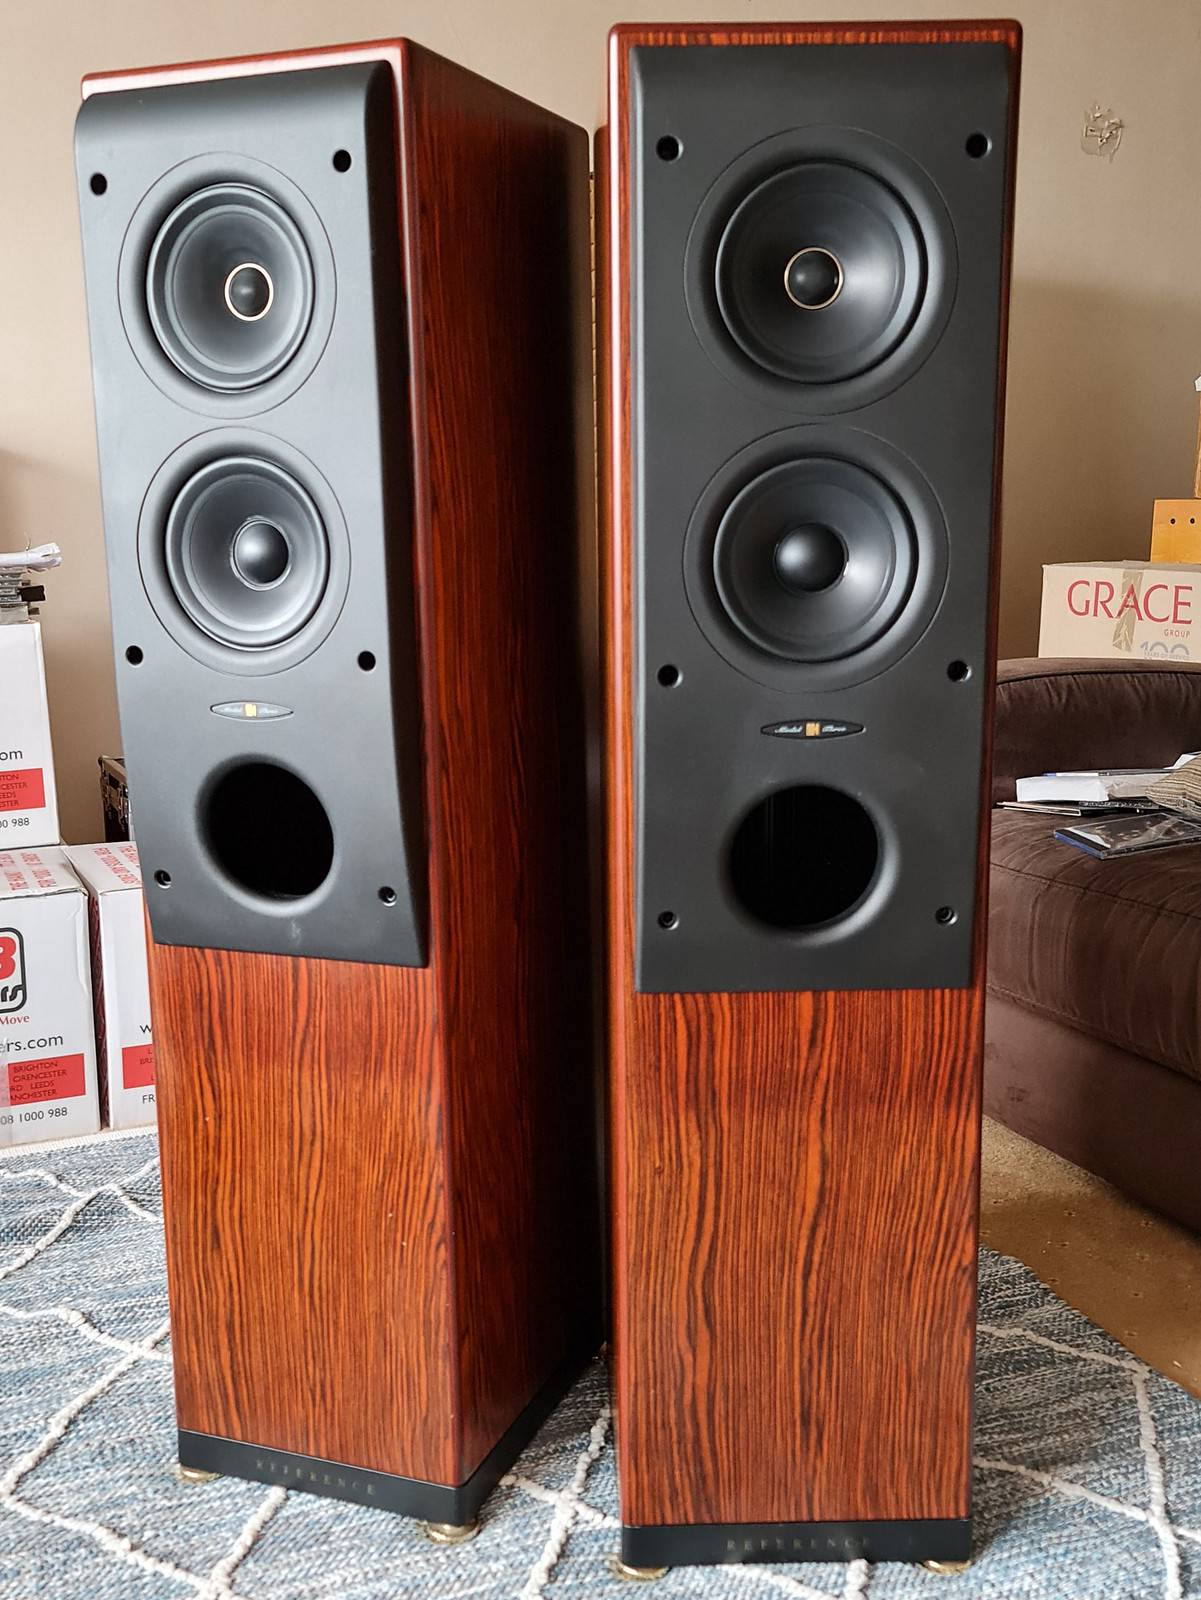 KEF Reference Model Three